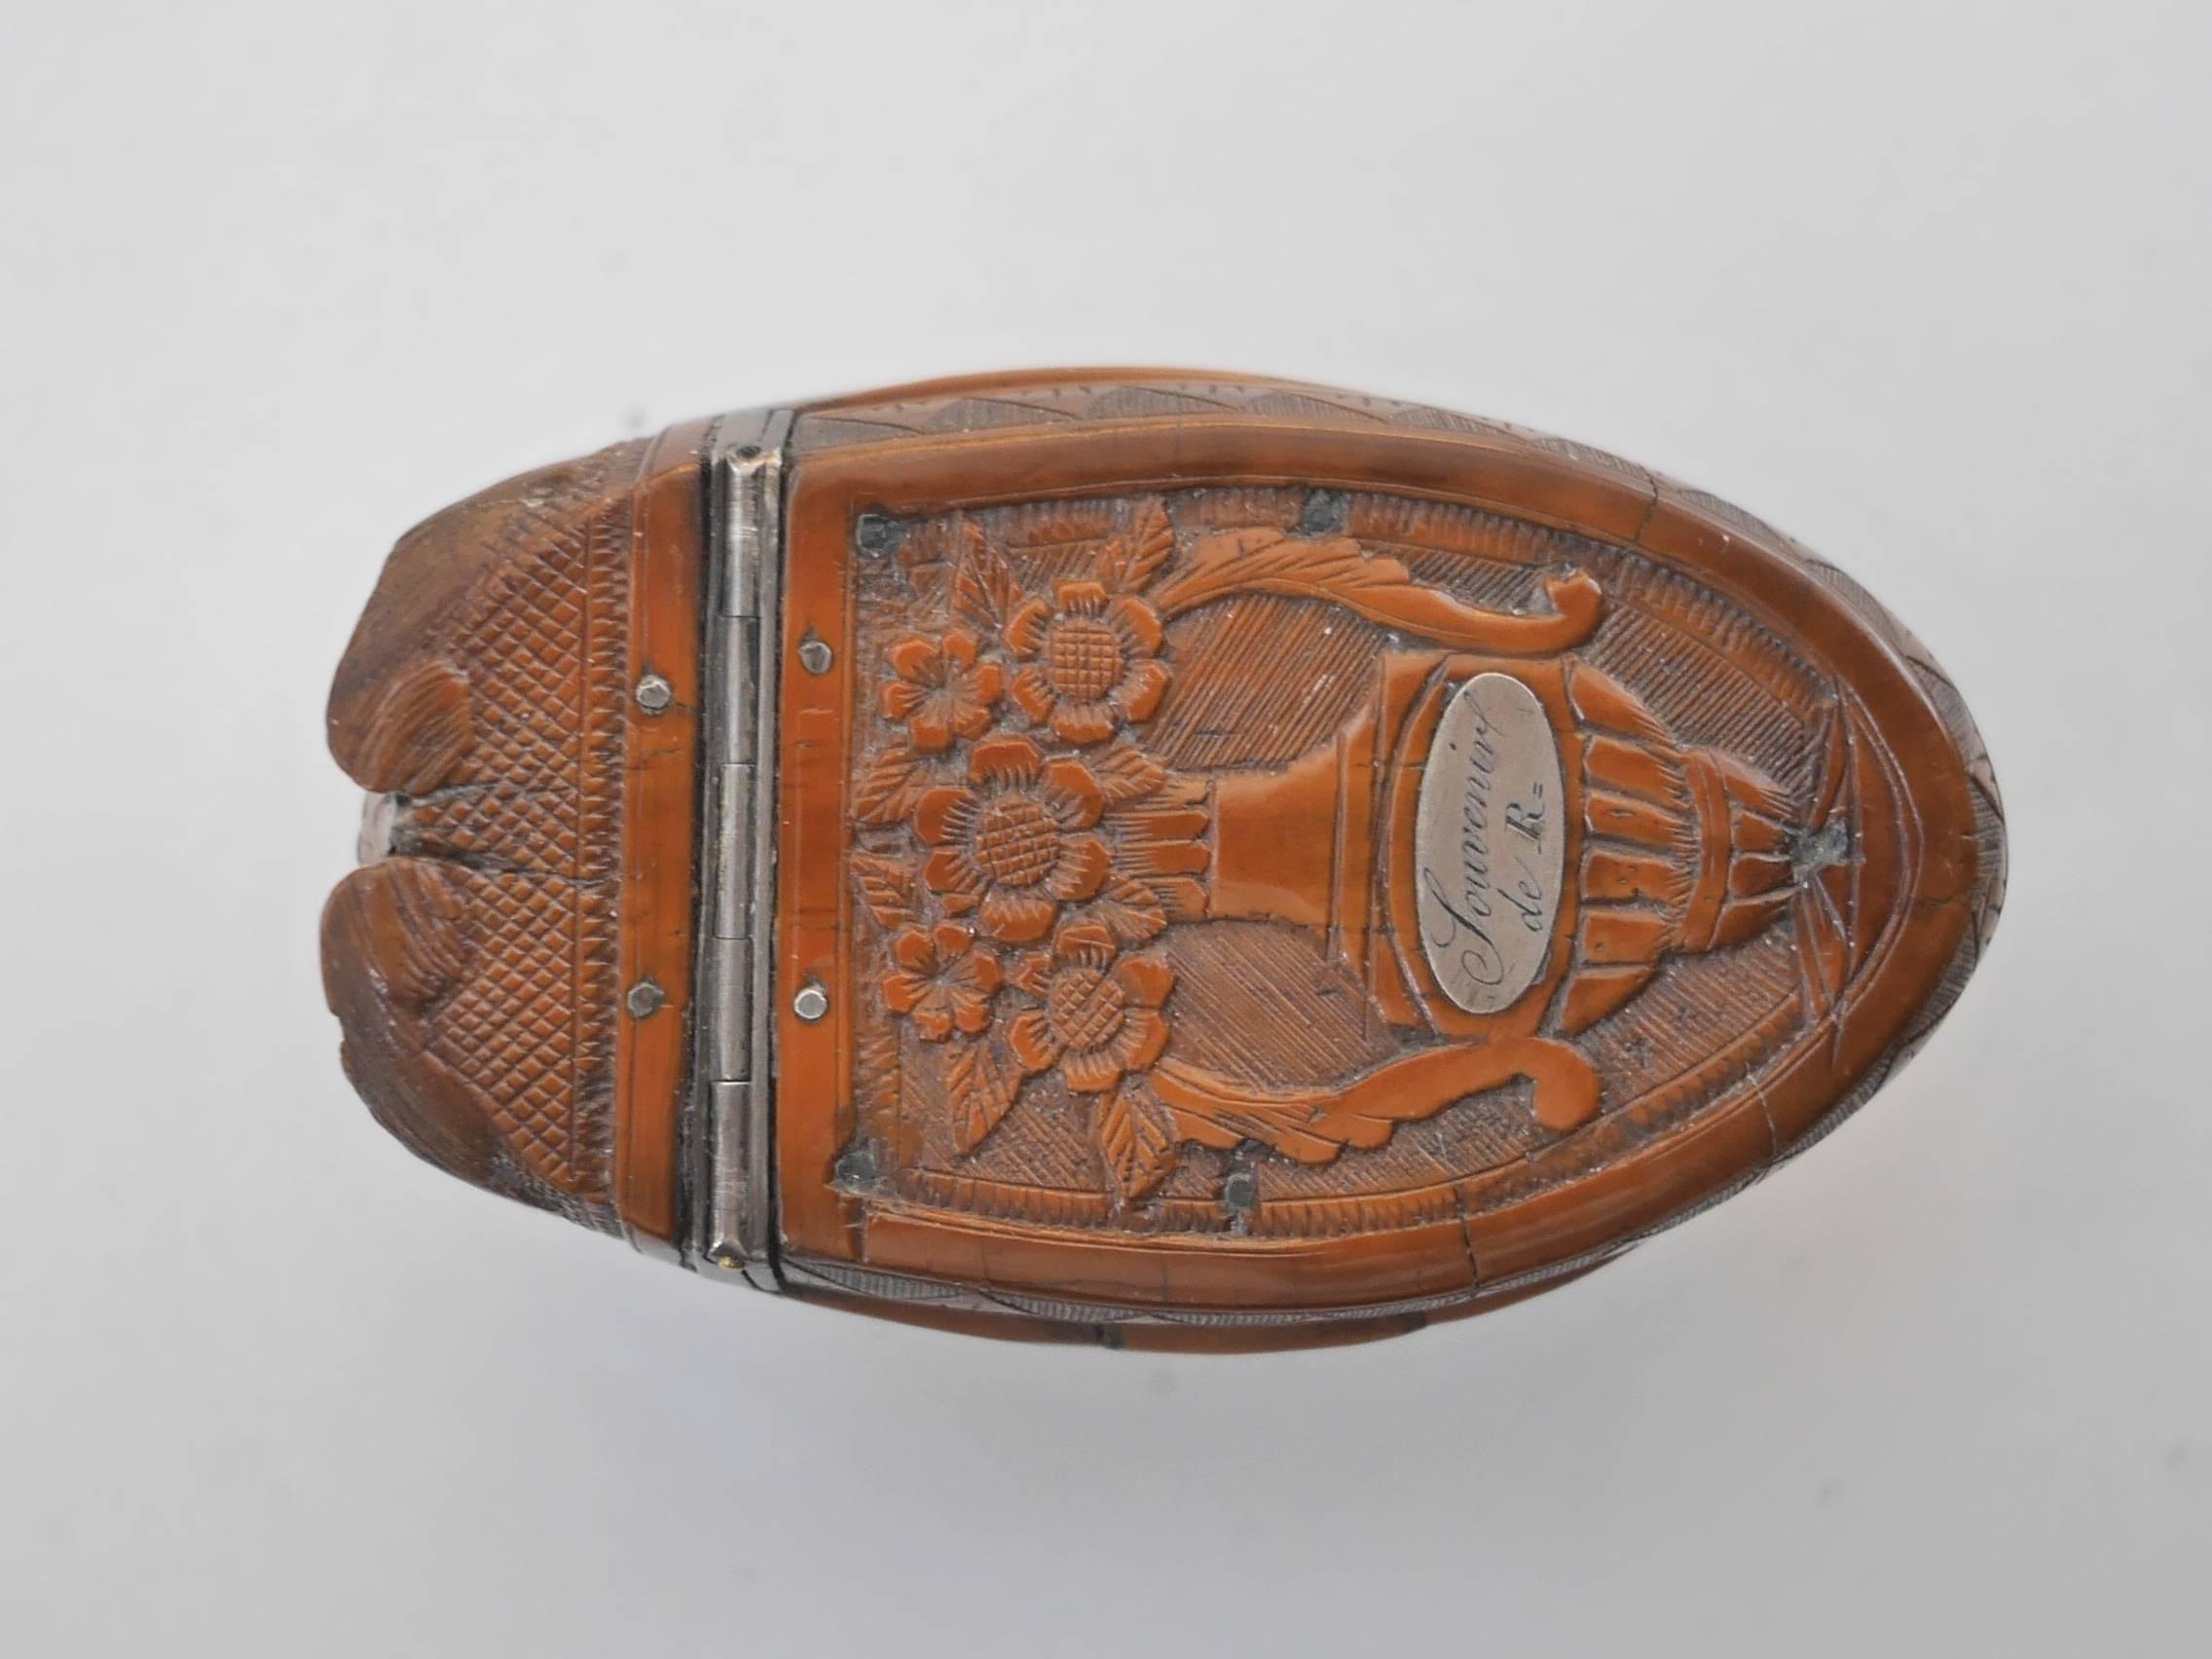 Beautiful Tagua nut carved snuffbox featuring a whale's head with sulphur eyes. 
The lid is decorated by a flowered vase topped by the inscription 